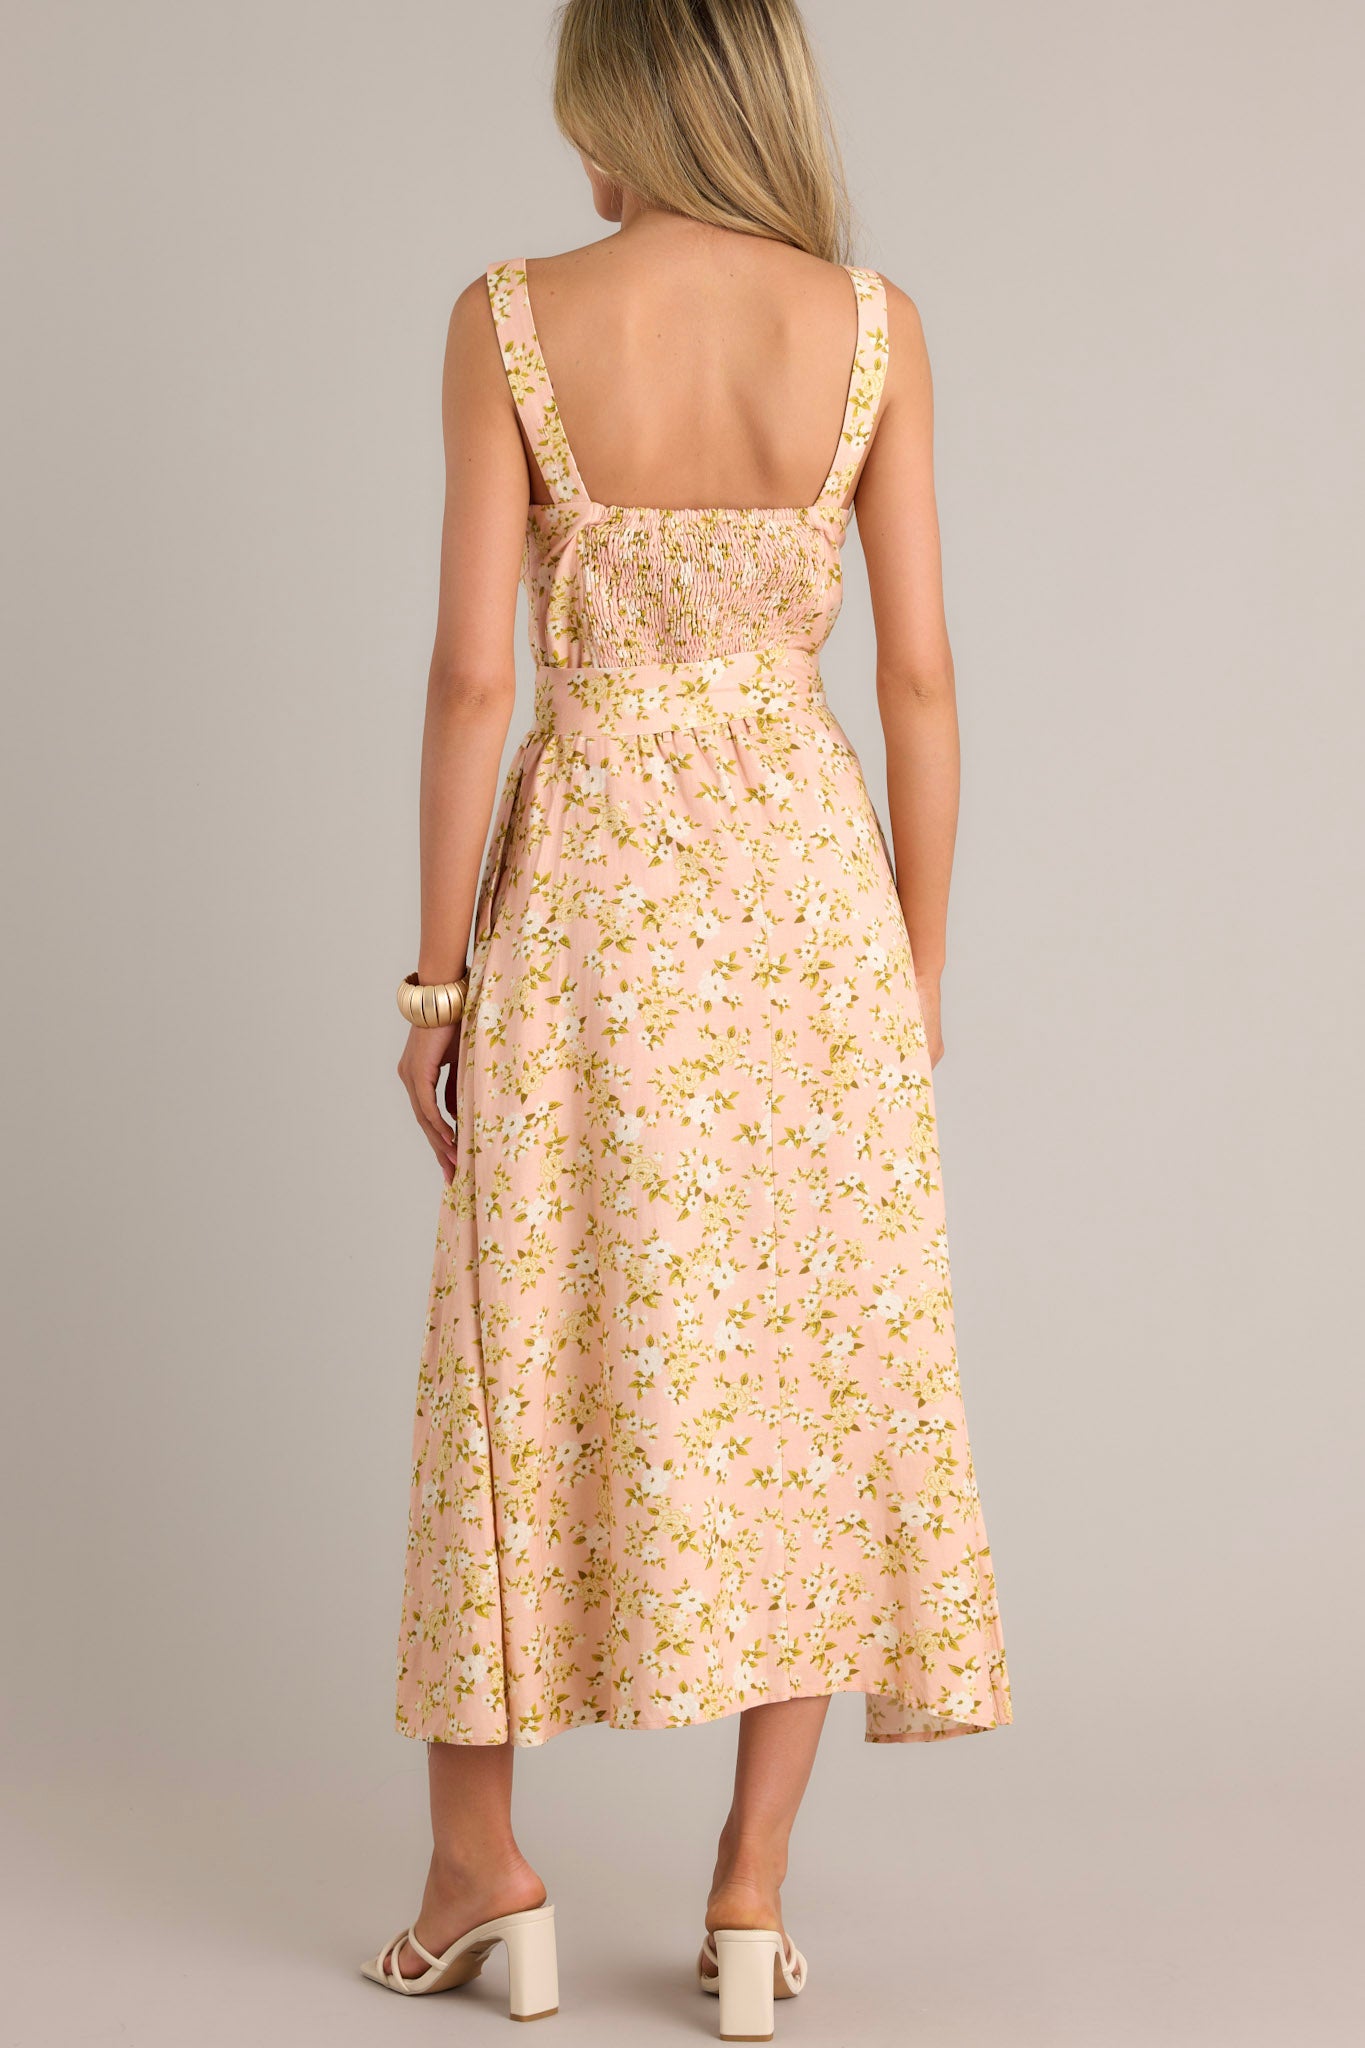 Back view of a peach maxi dress highlighting the smocked back insert, discrete zipper, and overall fit.